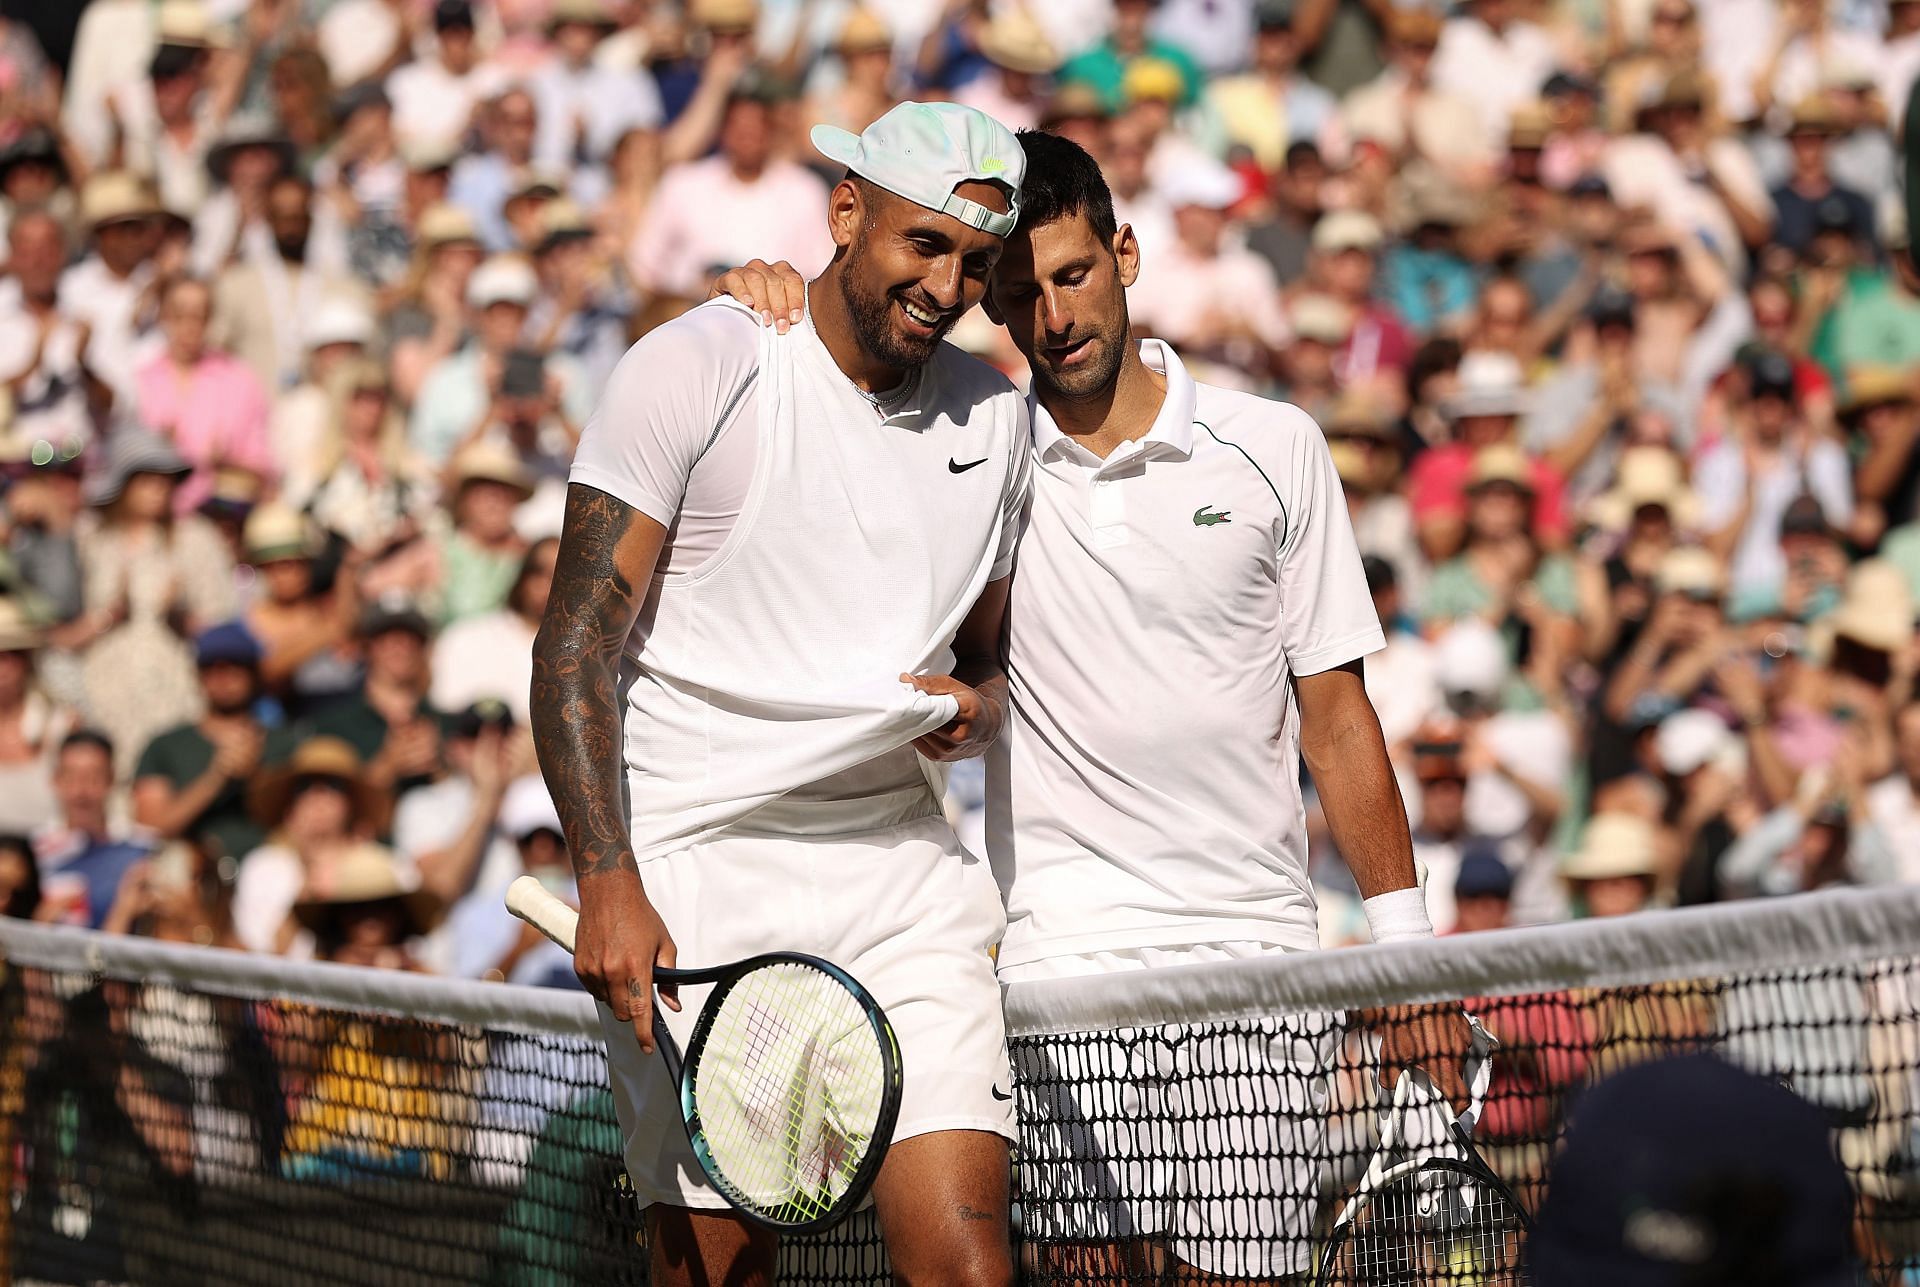 While Nick Kyrgios will be traveling to Montreal, Novak Djokovic is not allowed entry into Canada